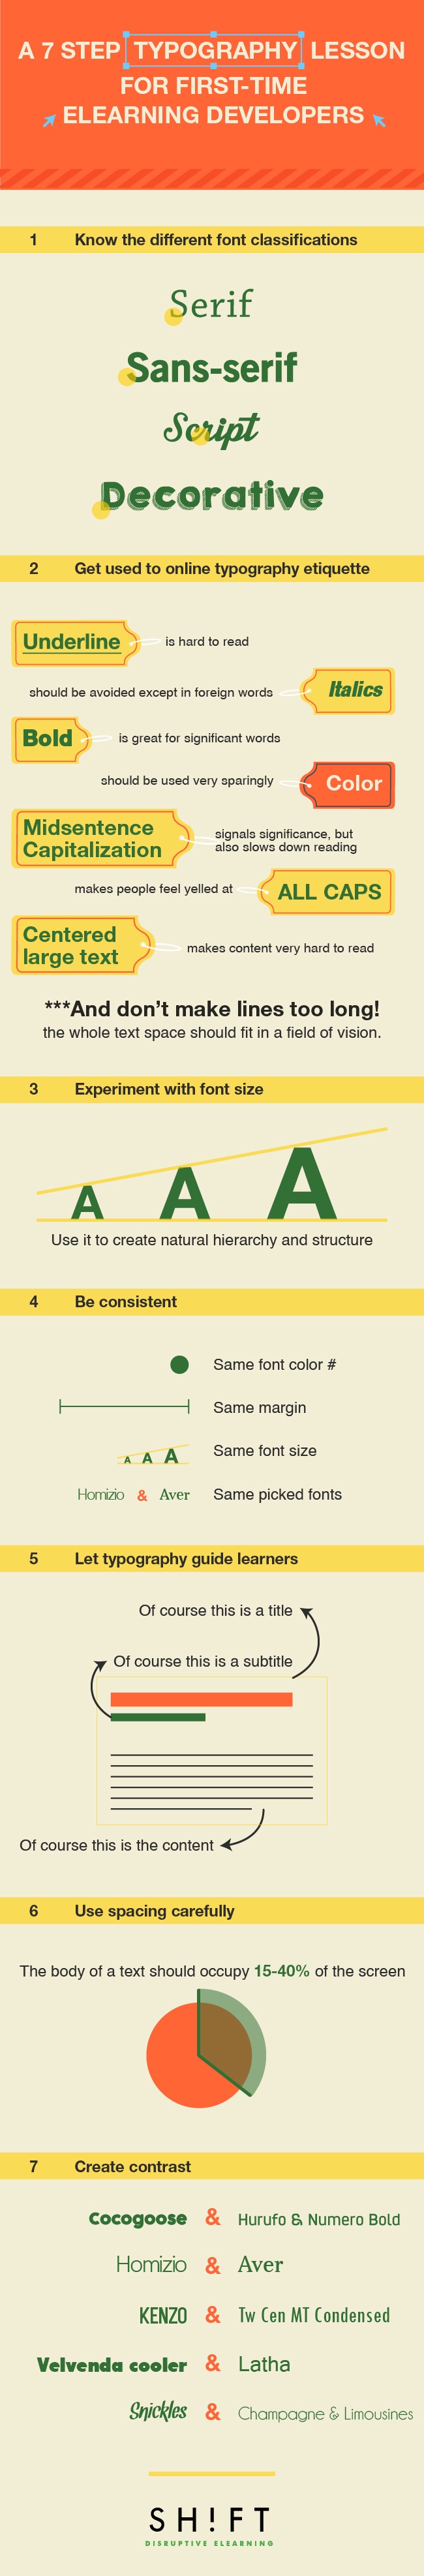 A Typography Lesson for eLearning Developers Infographic